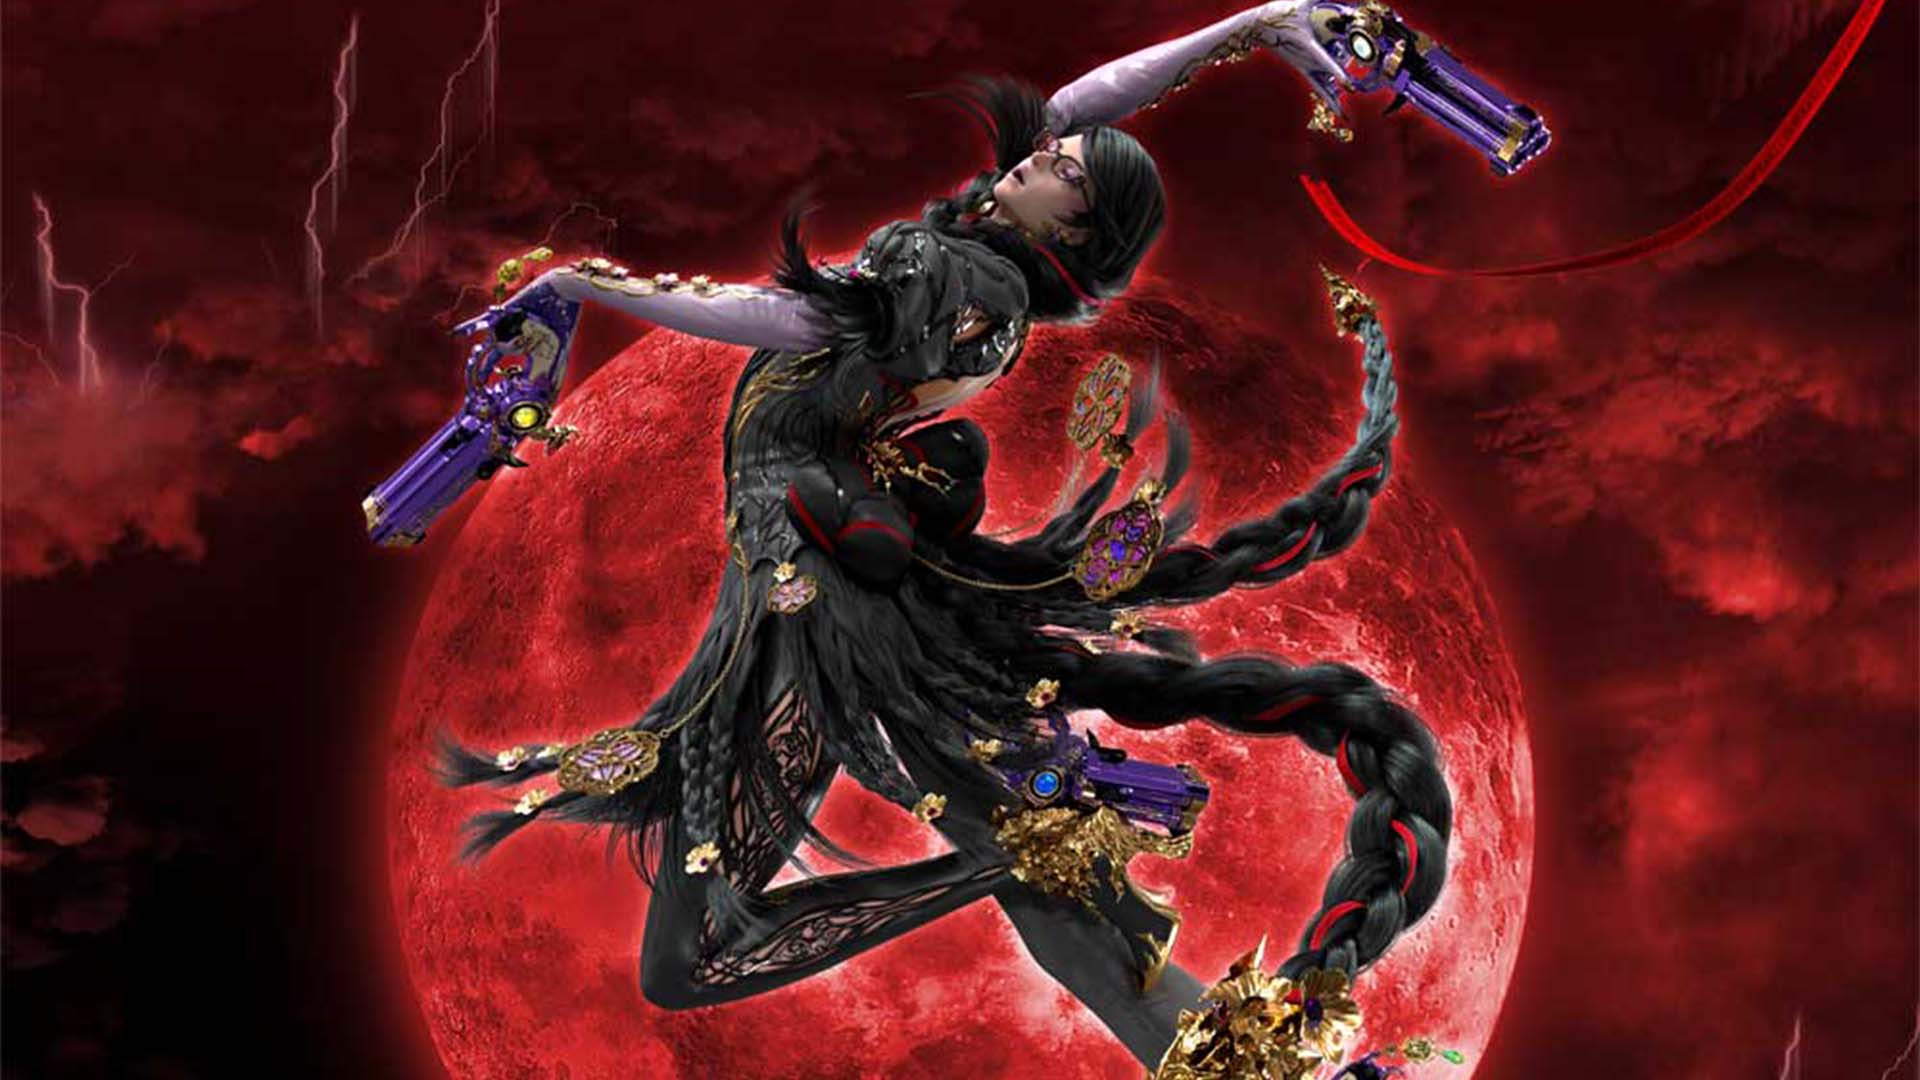 Watch nearly 8 minutes of 'Bayonetta 3' gameplay in a new trailer